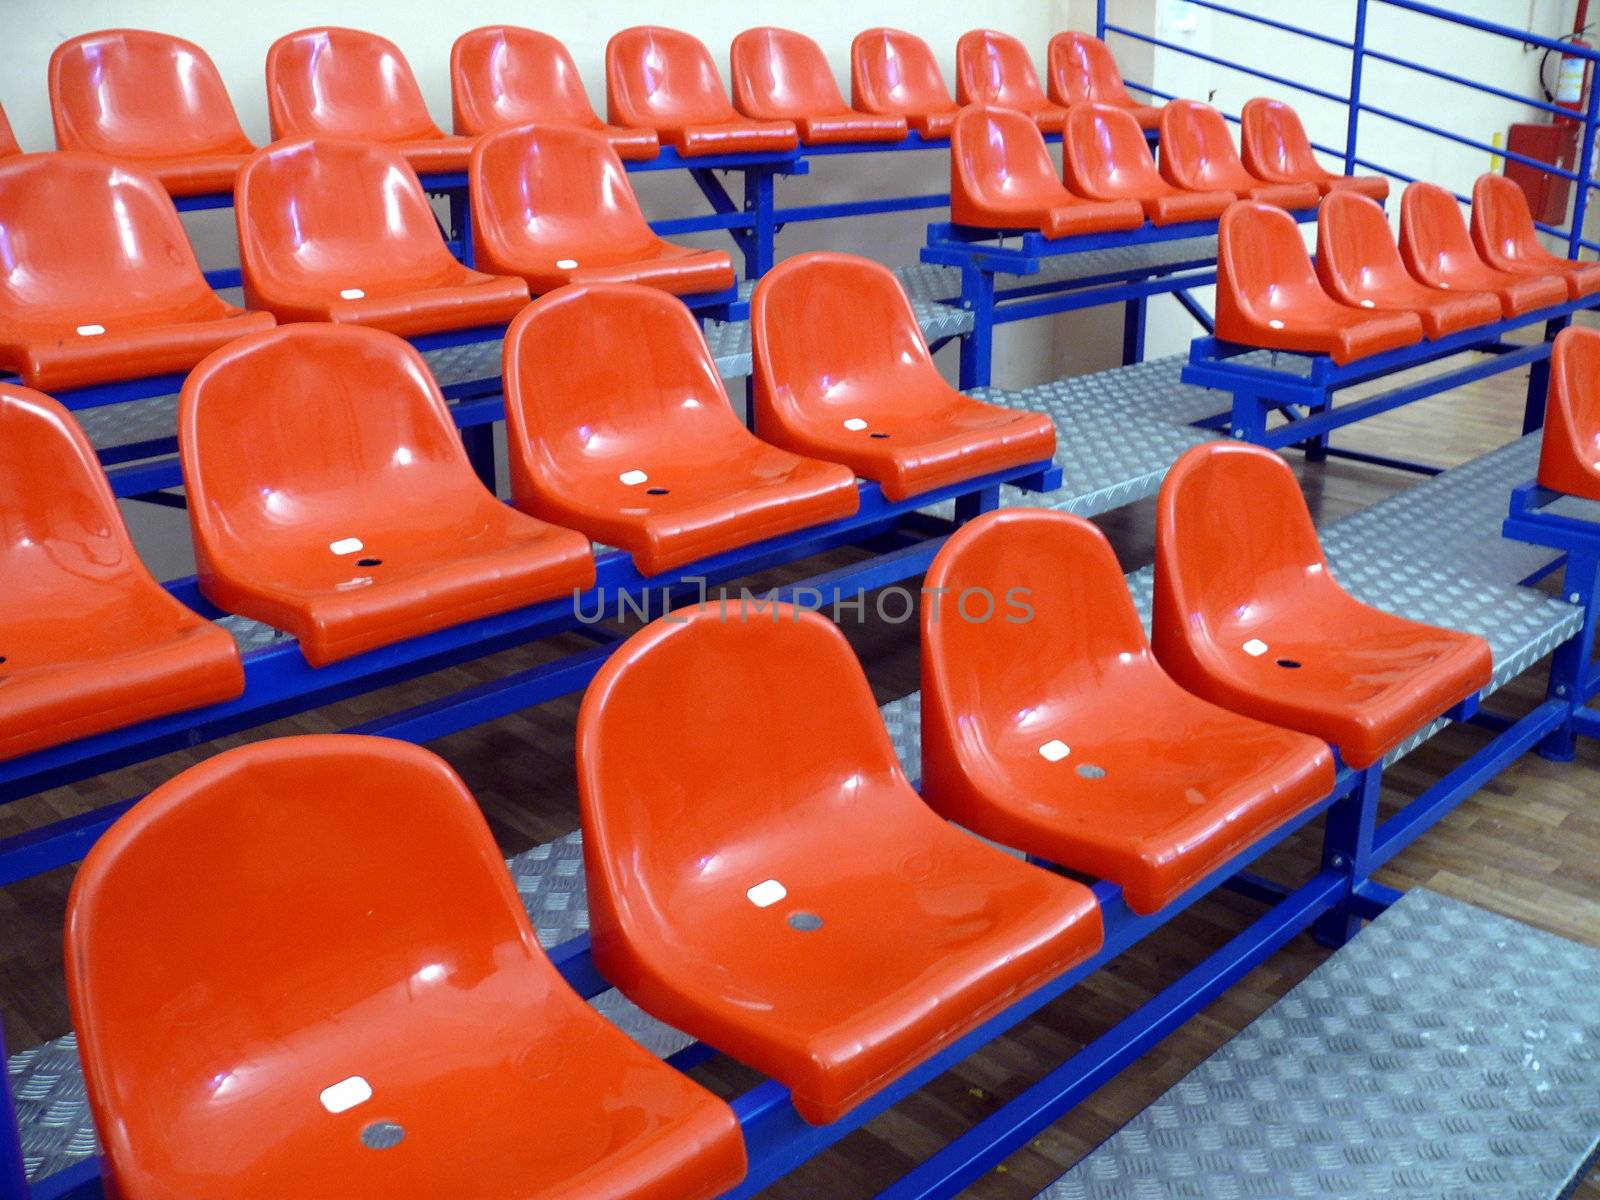 Red seats in ice area